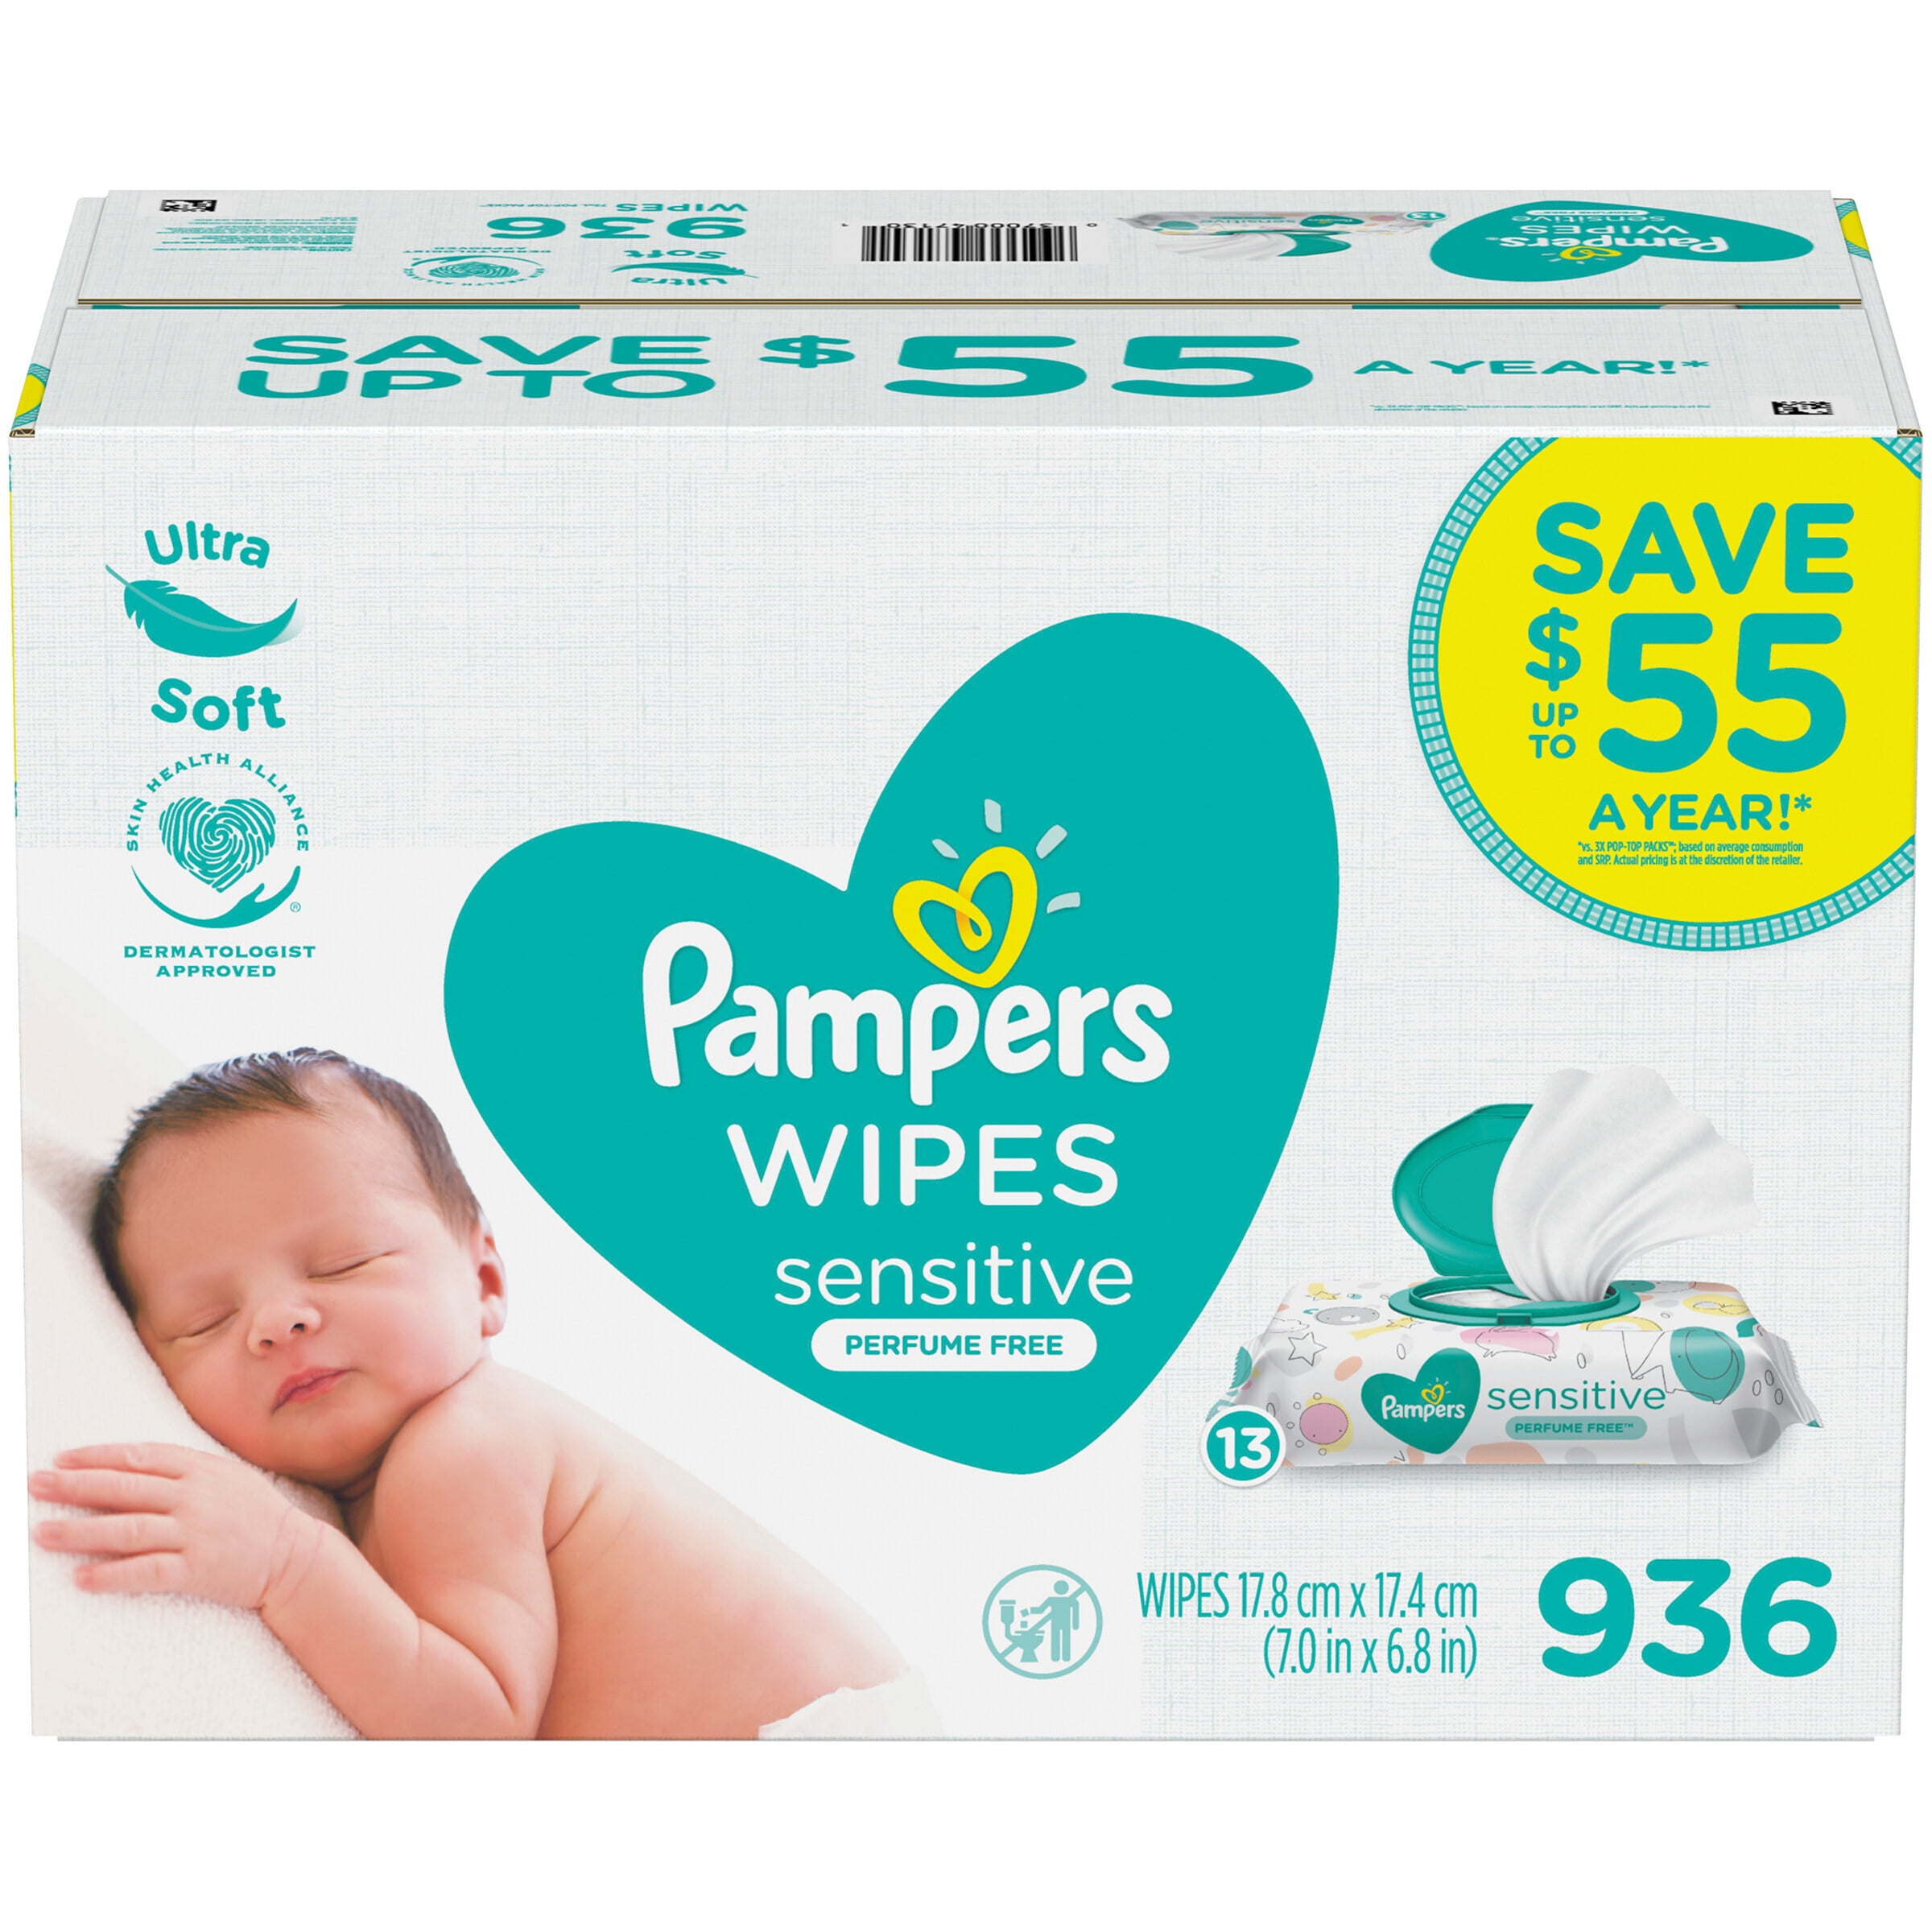 PAMPERS Sensitive Baby Wipes 1024ct.FREE SHIPPING 